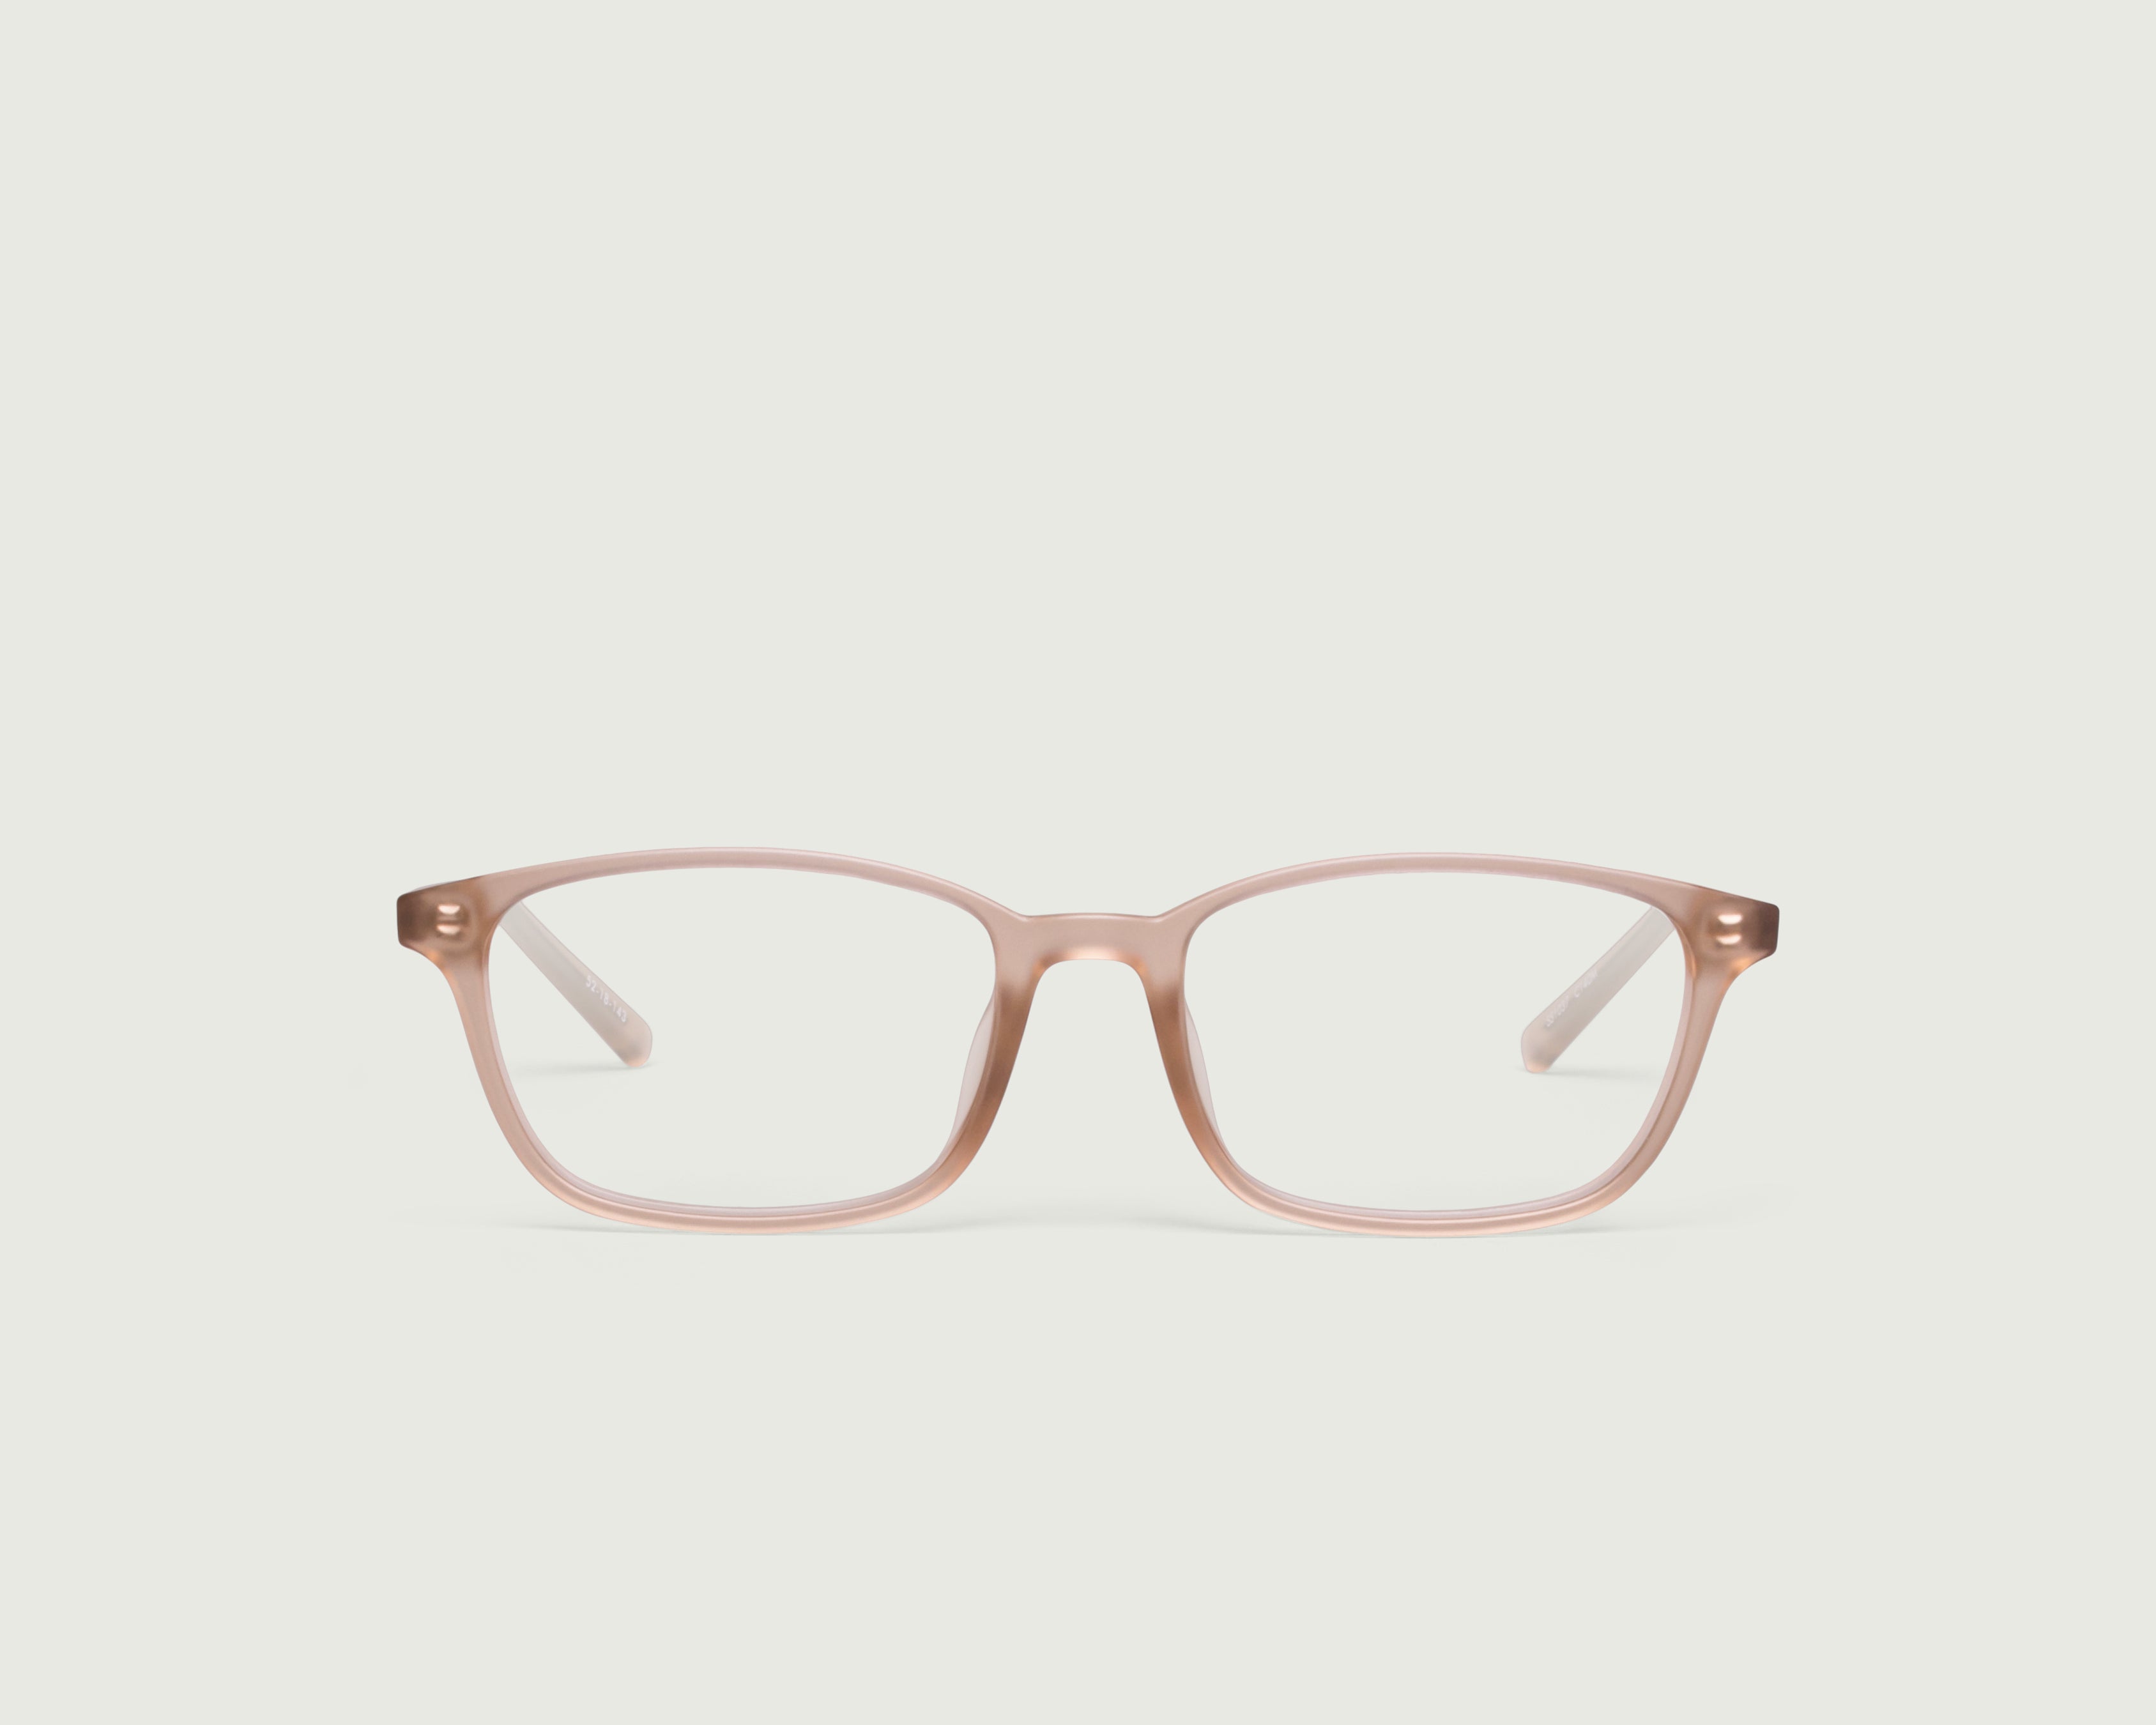 Pomelo::Neal Eyeglasses rectangle nude plastic front